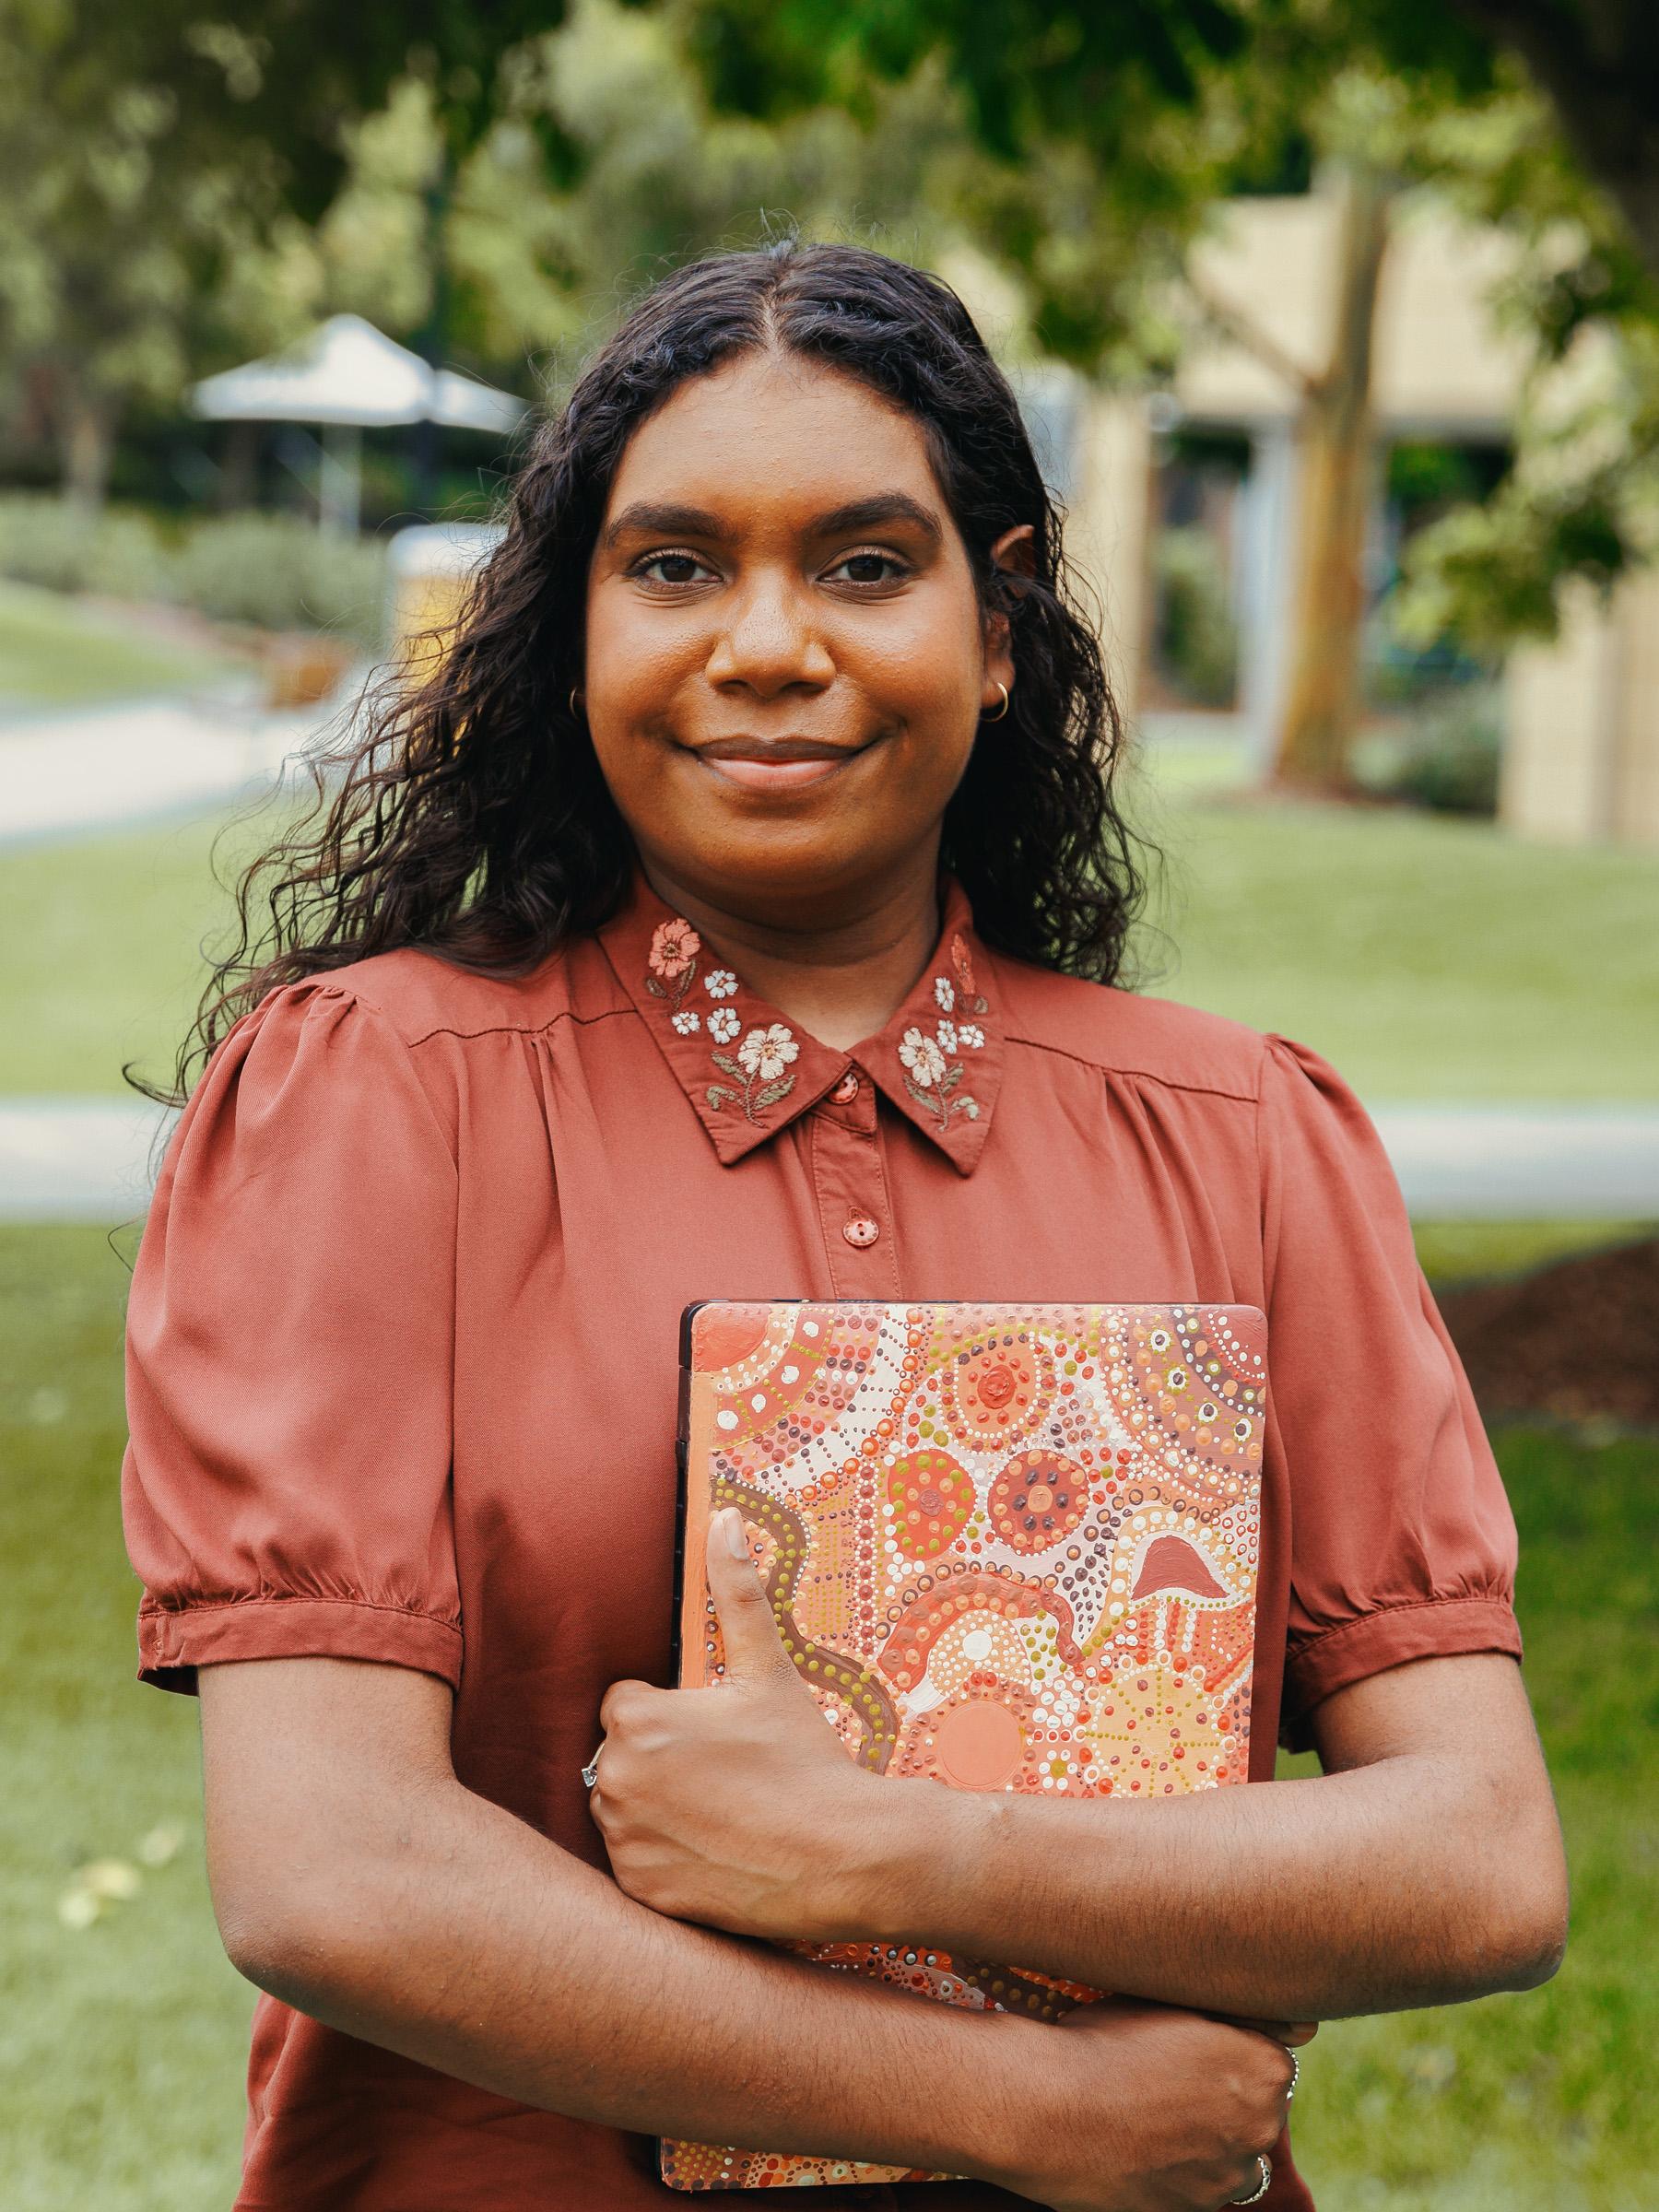 A young Aboriginal woman holding laptop covered in artwork they designed and painted